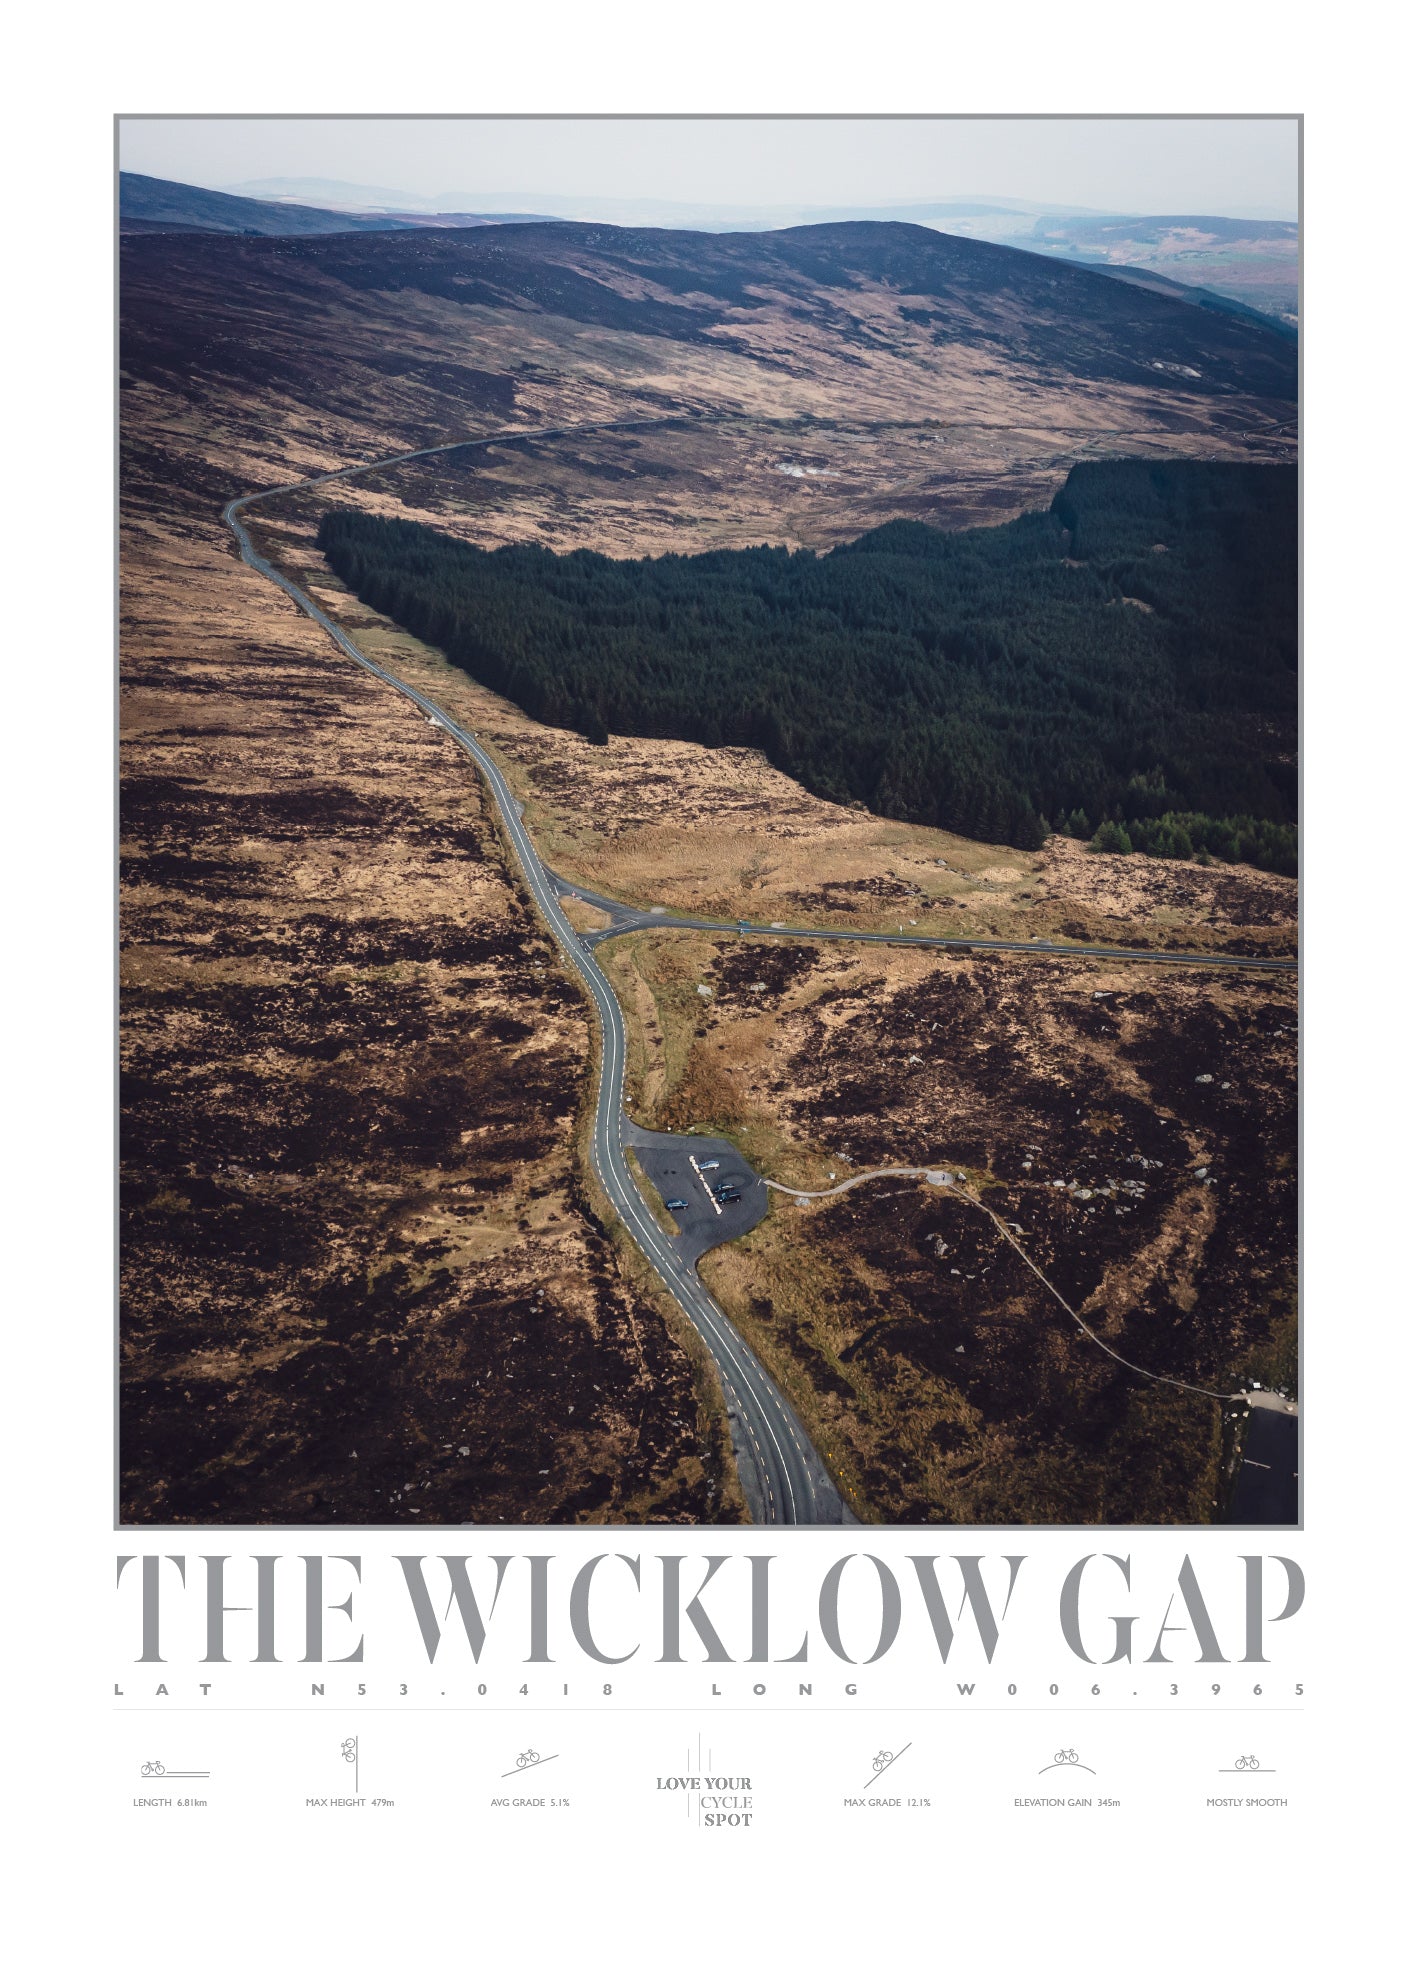 THE WICKLOW GAP CYCLE SPOT CO WICKLOW